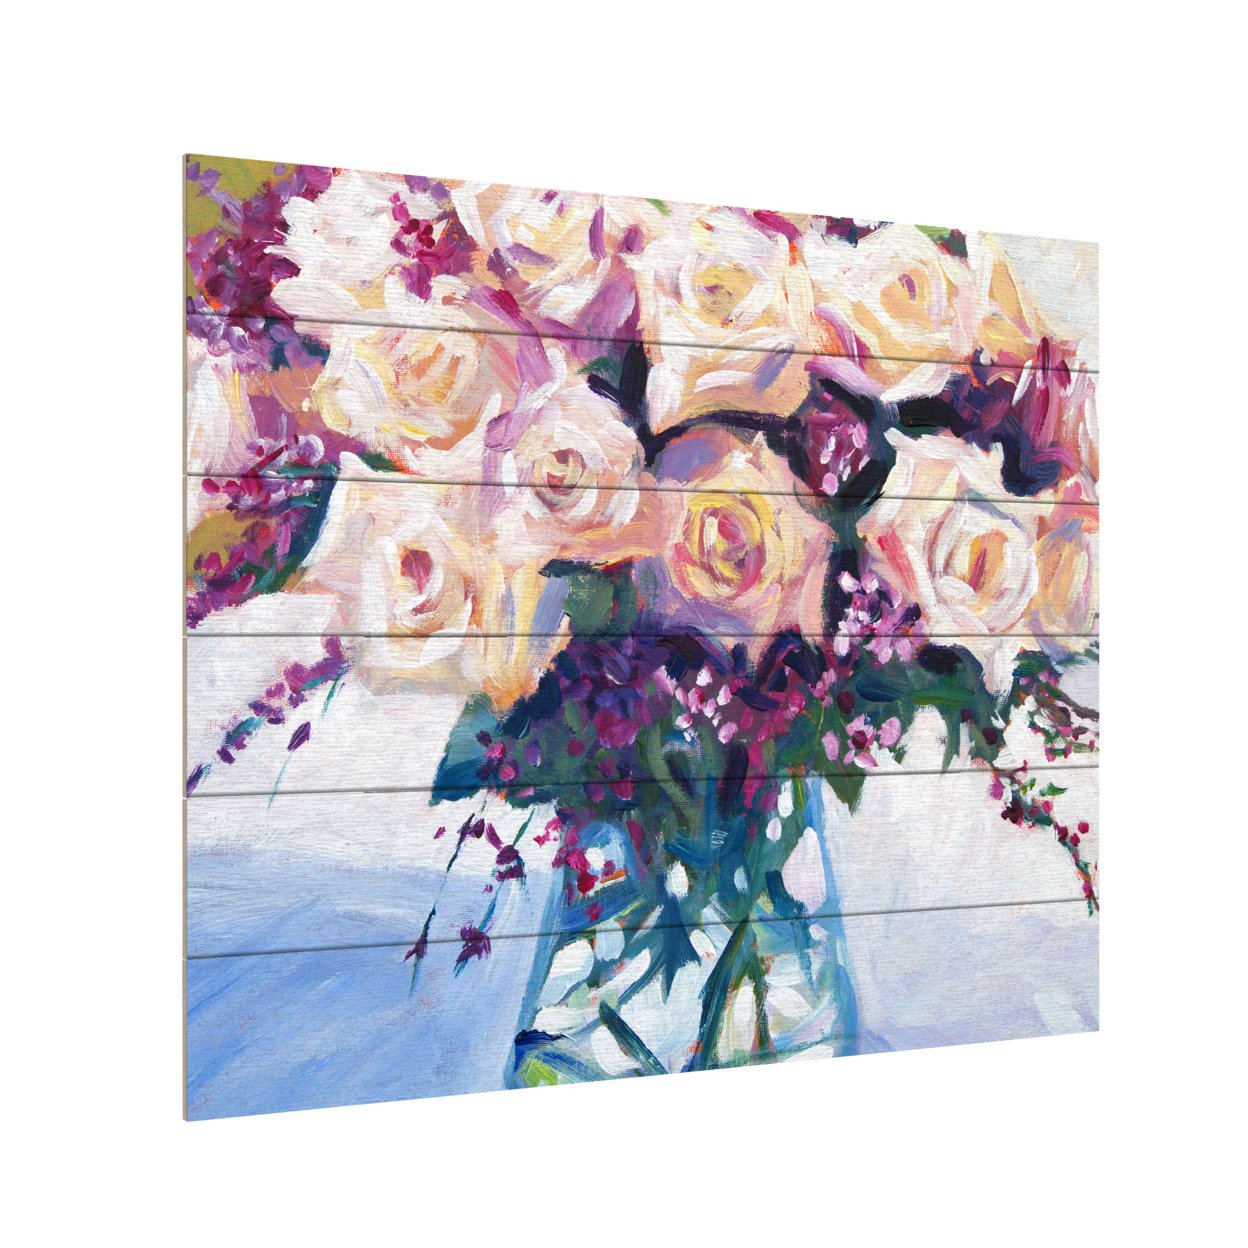 Wooden Slat Art 18 X 22 Inches Titled Roses In Glass Ready To Hang Home Decor Picture